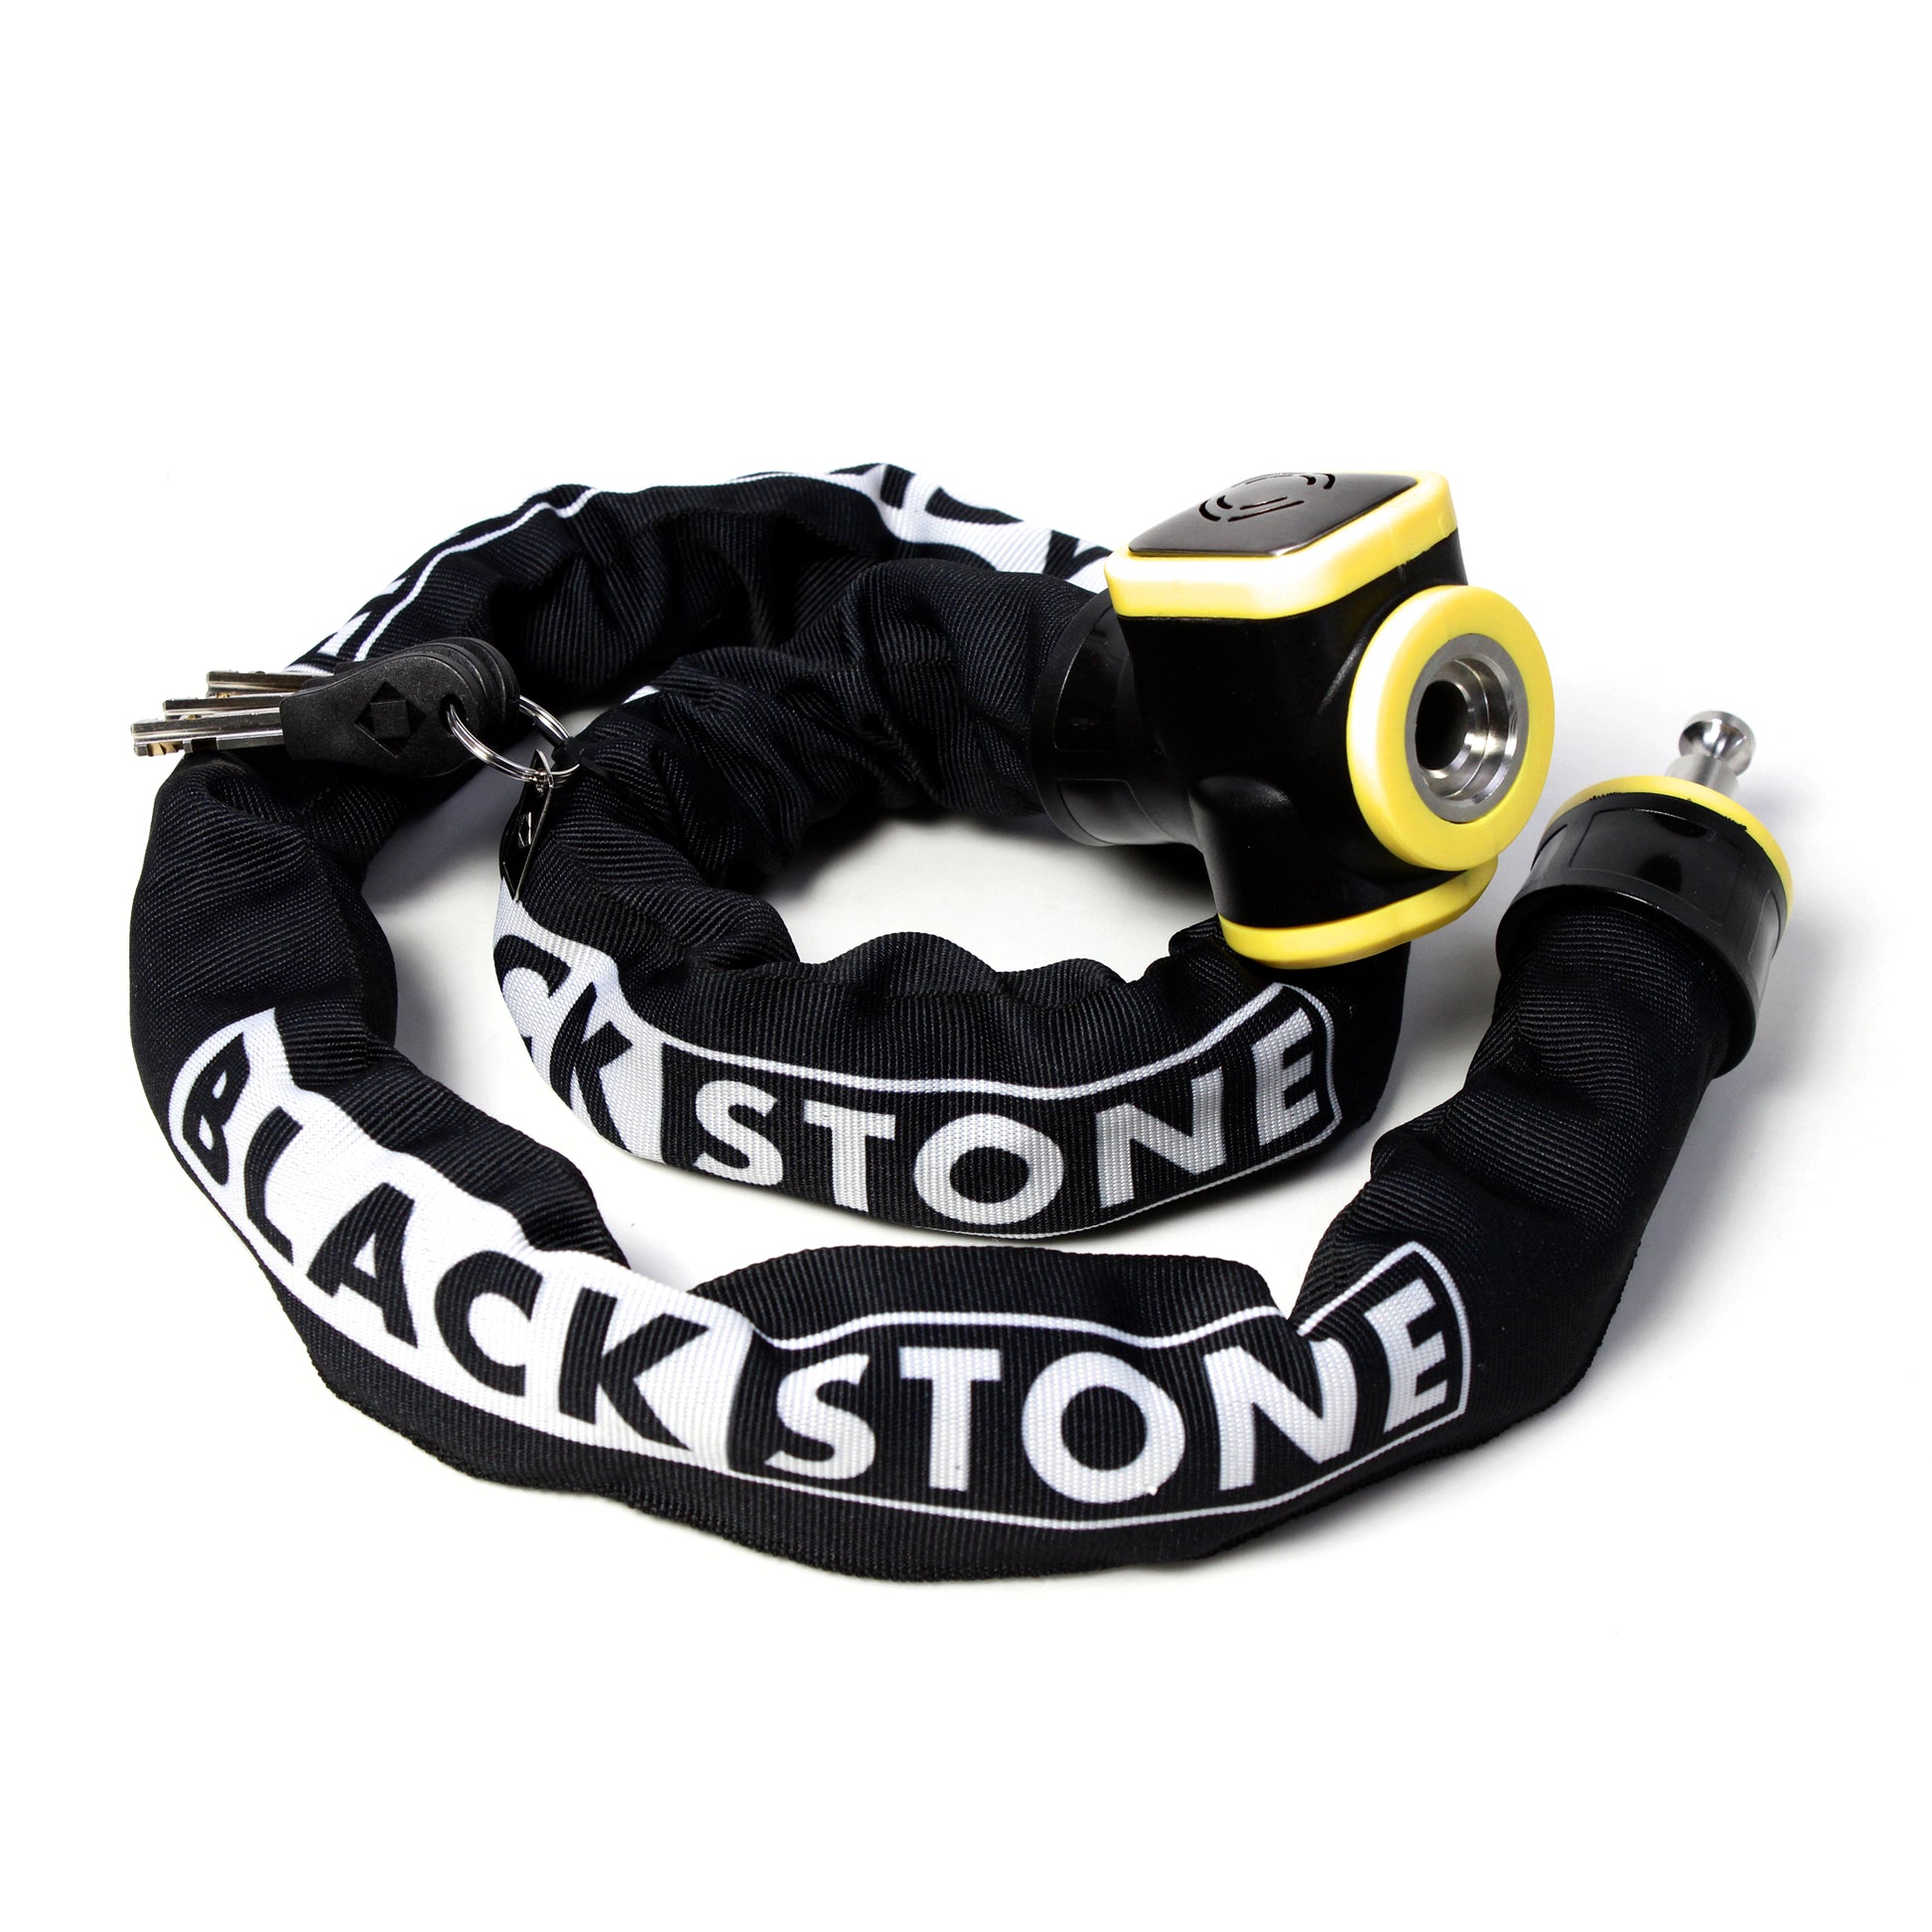 The image displays a Blackstone alarm chain lock laid out in a circular shape against a white background. The chain is protected by a black fabric sleeve with the "BLACKSTONE" logo printed in white, which seems to provide a visual and tactile contrast to the bright yellow alarm unit. The key protrudes from the lock, ready for use, and the entire assembly presents a robust and secure appearance, hinting at the product's purpose for theft prevention. 